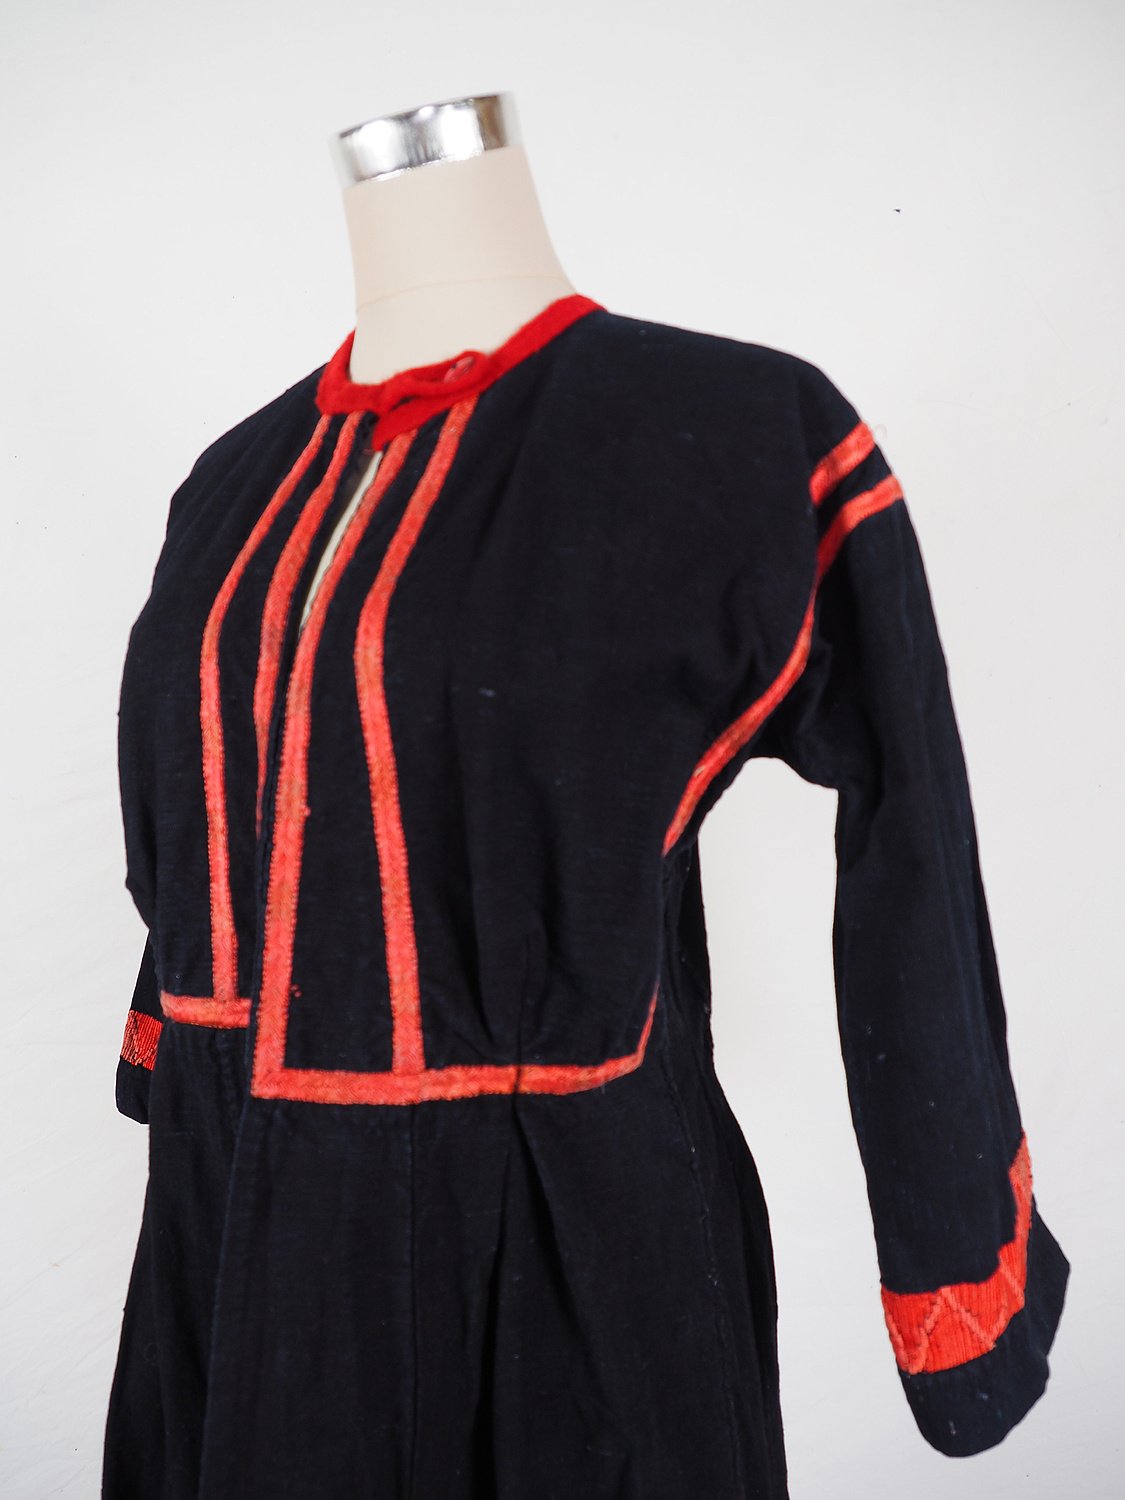 Palestinian girls embroidered ethnic dress No:20